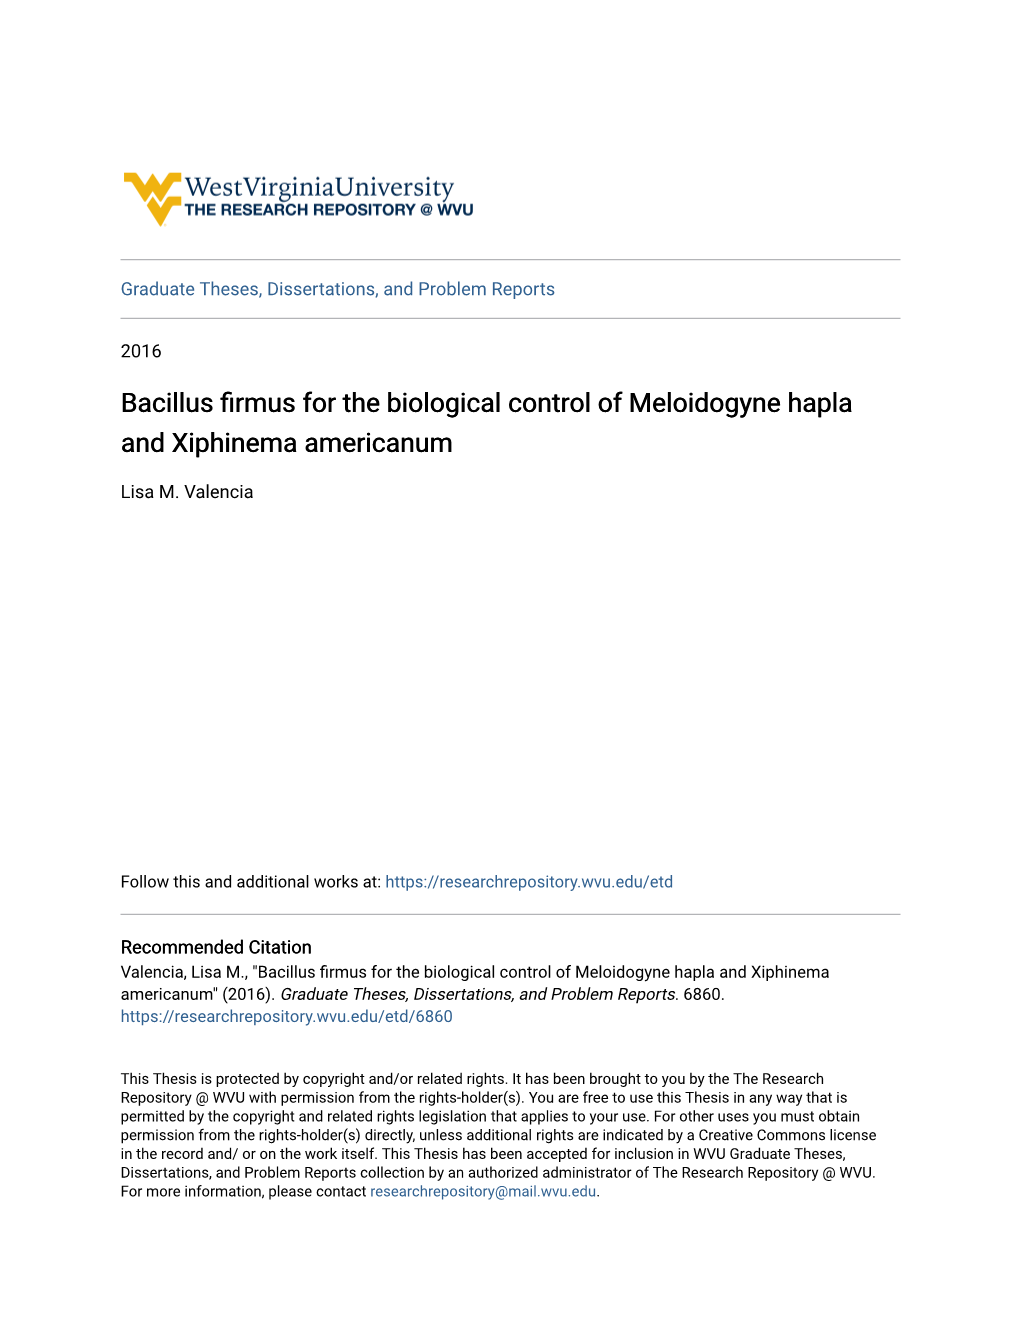 Bacillus Firmus for the Biological Control of Meloidogyne Hapla and Xiphinema Americanum